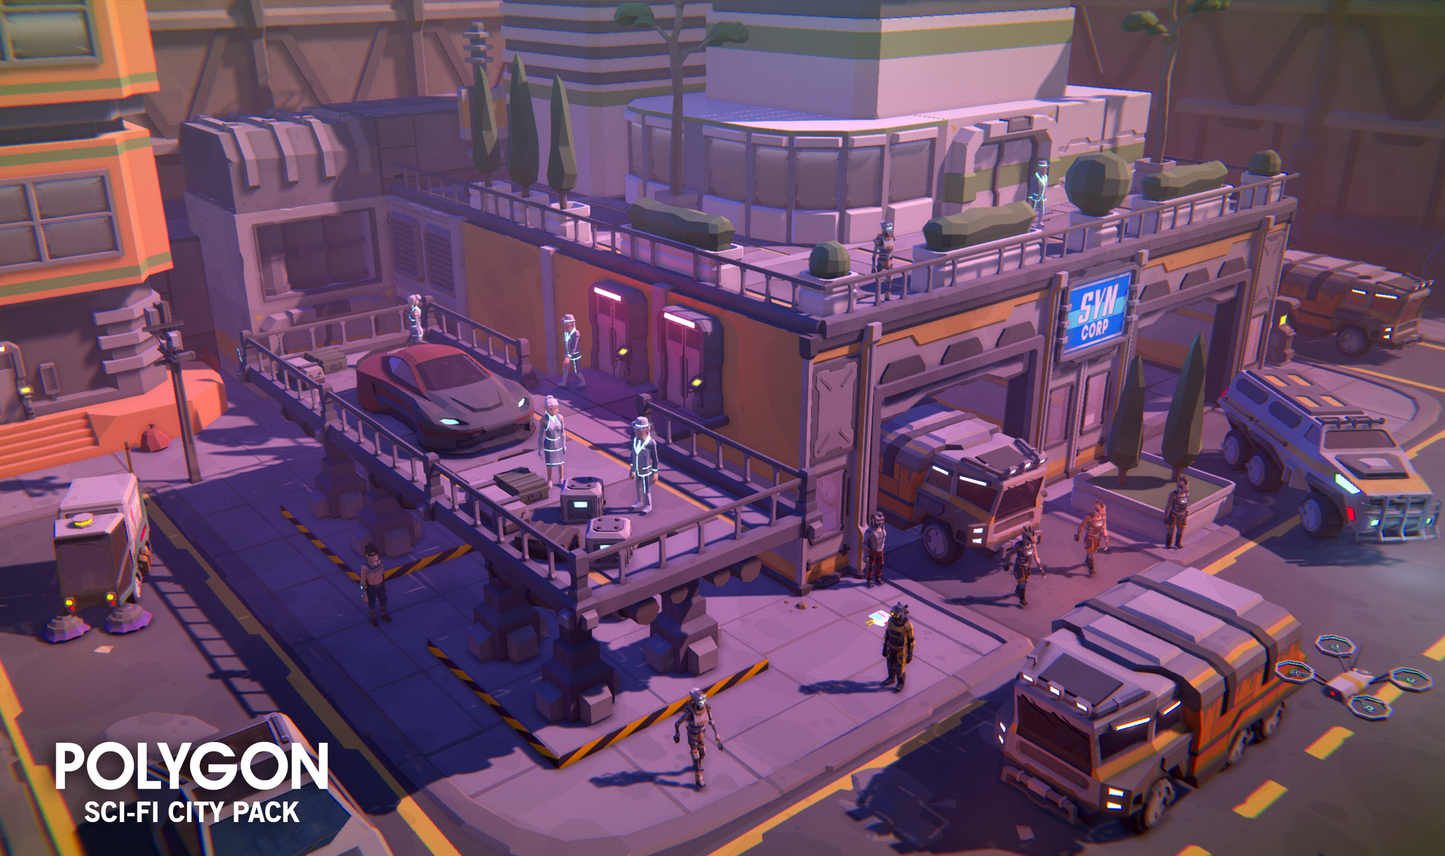 POLYGON - Sci-Fi City Pack - Synty Studios - Unity and Unreal 3D low poly assets for game development